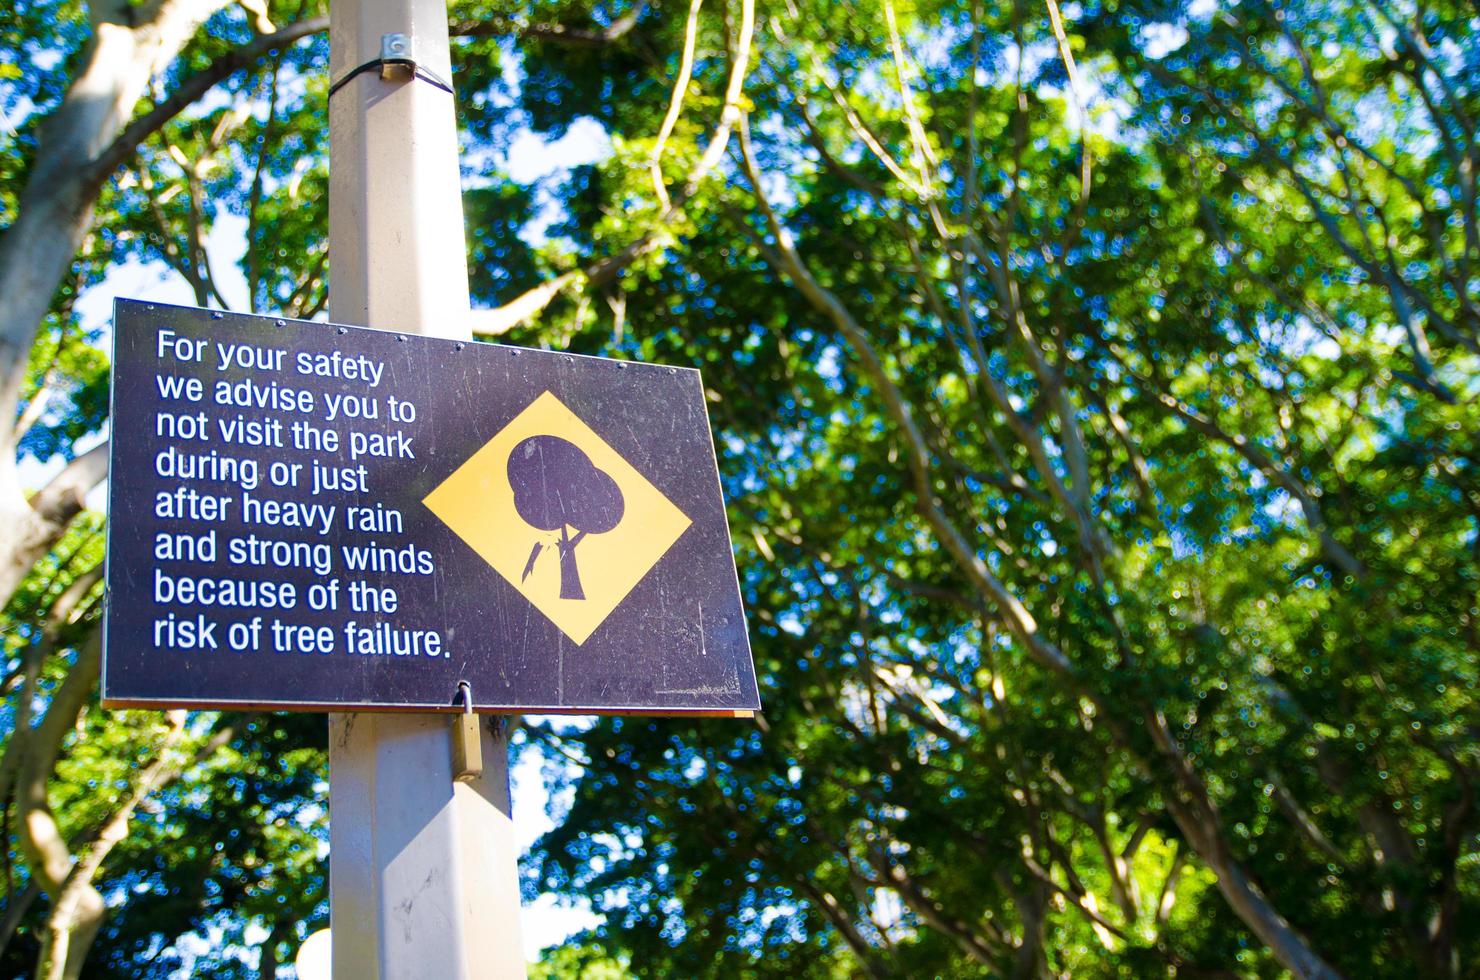 Warning sign  For your safety we advise you to not visit the park during or just after heavy rain and strong winds because of the risk of tree failure photo